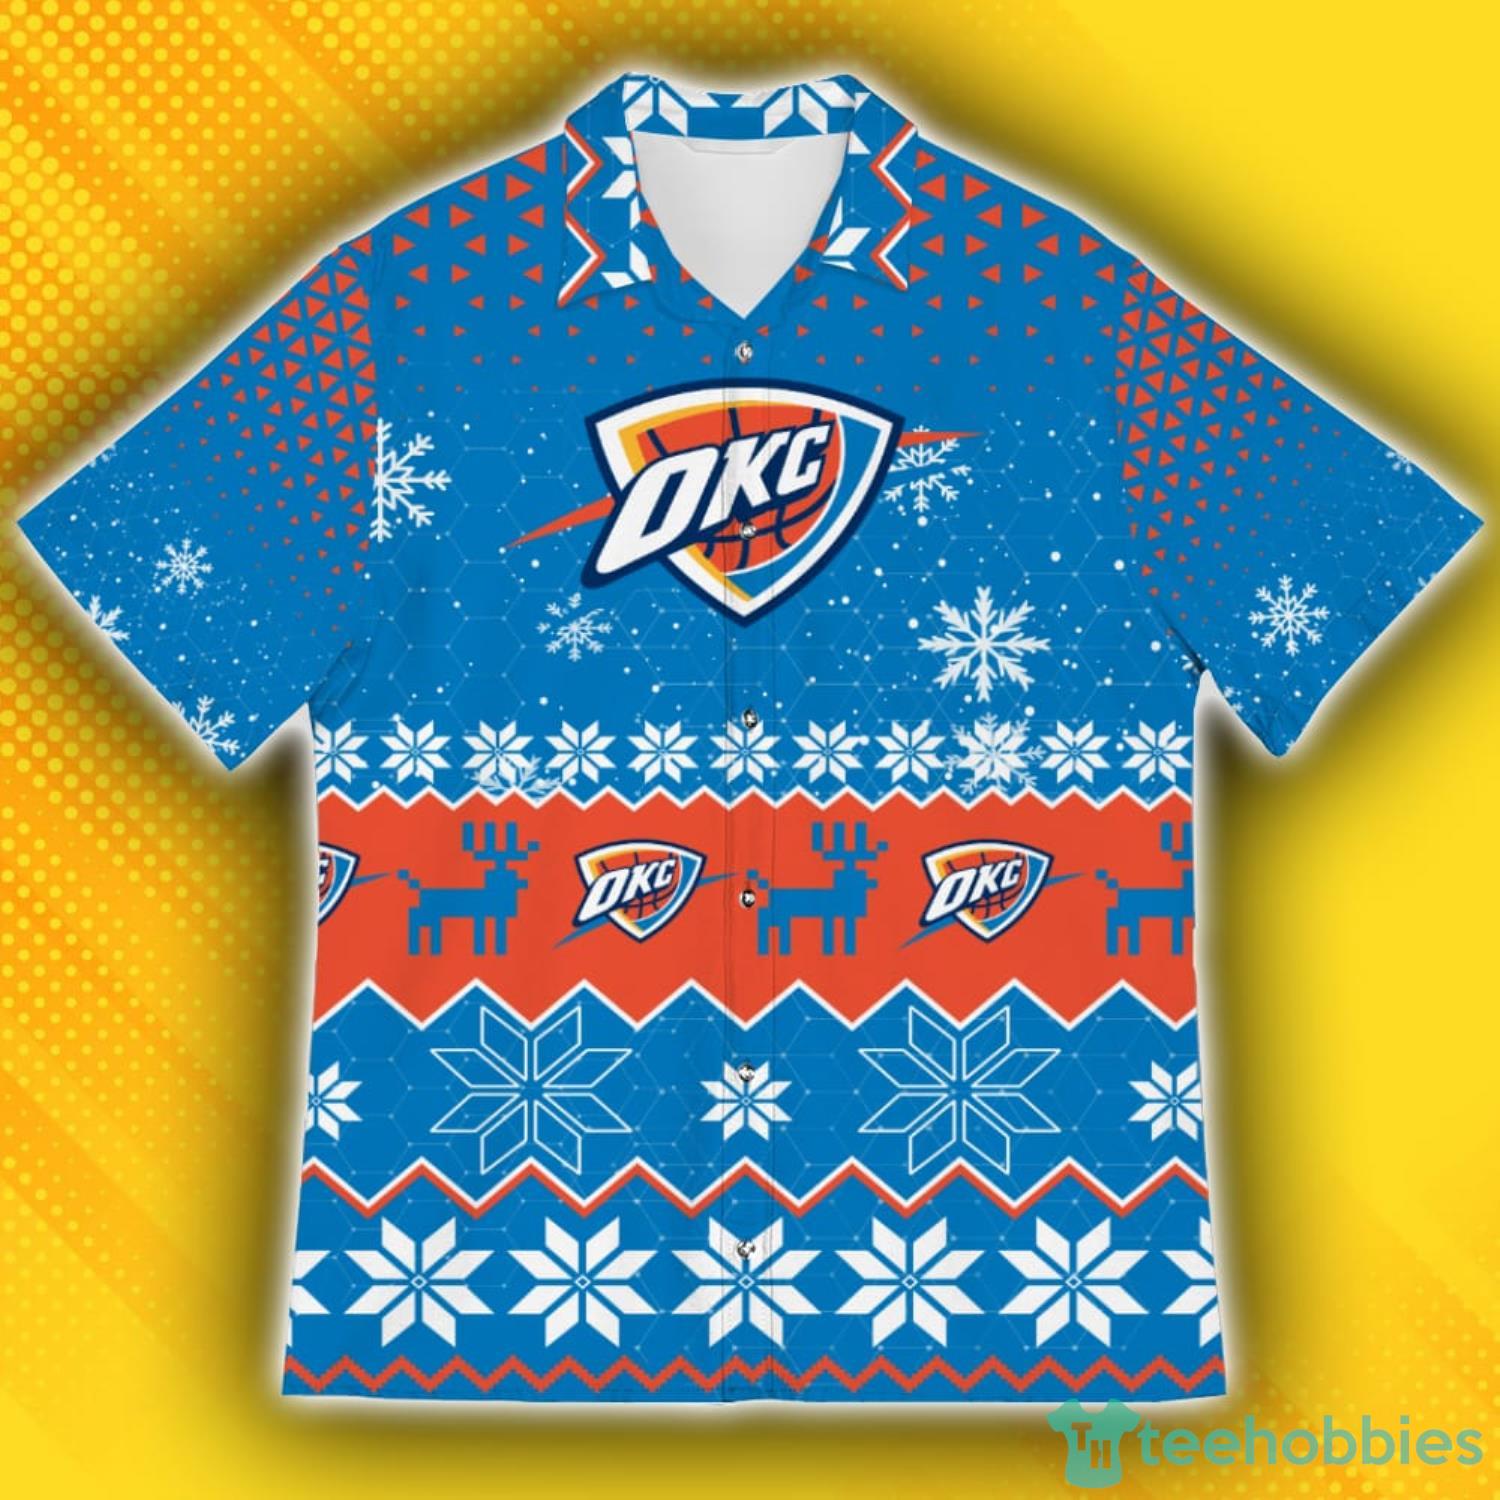 PHOTO: What do you think of the Thunder's Christmas jerseys?